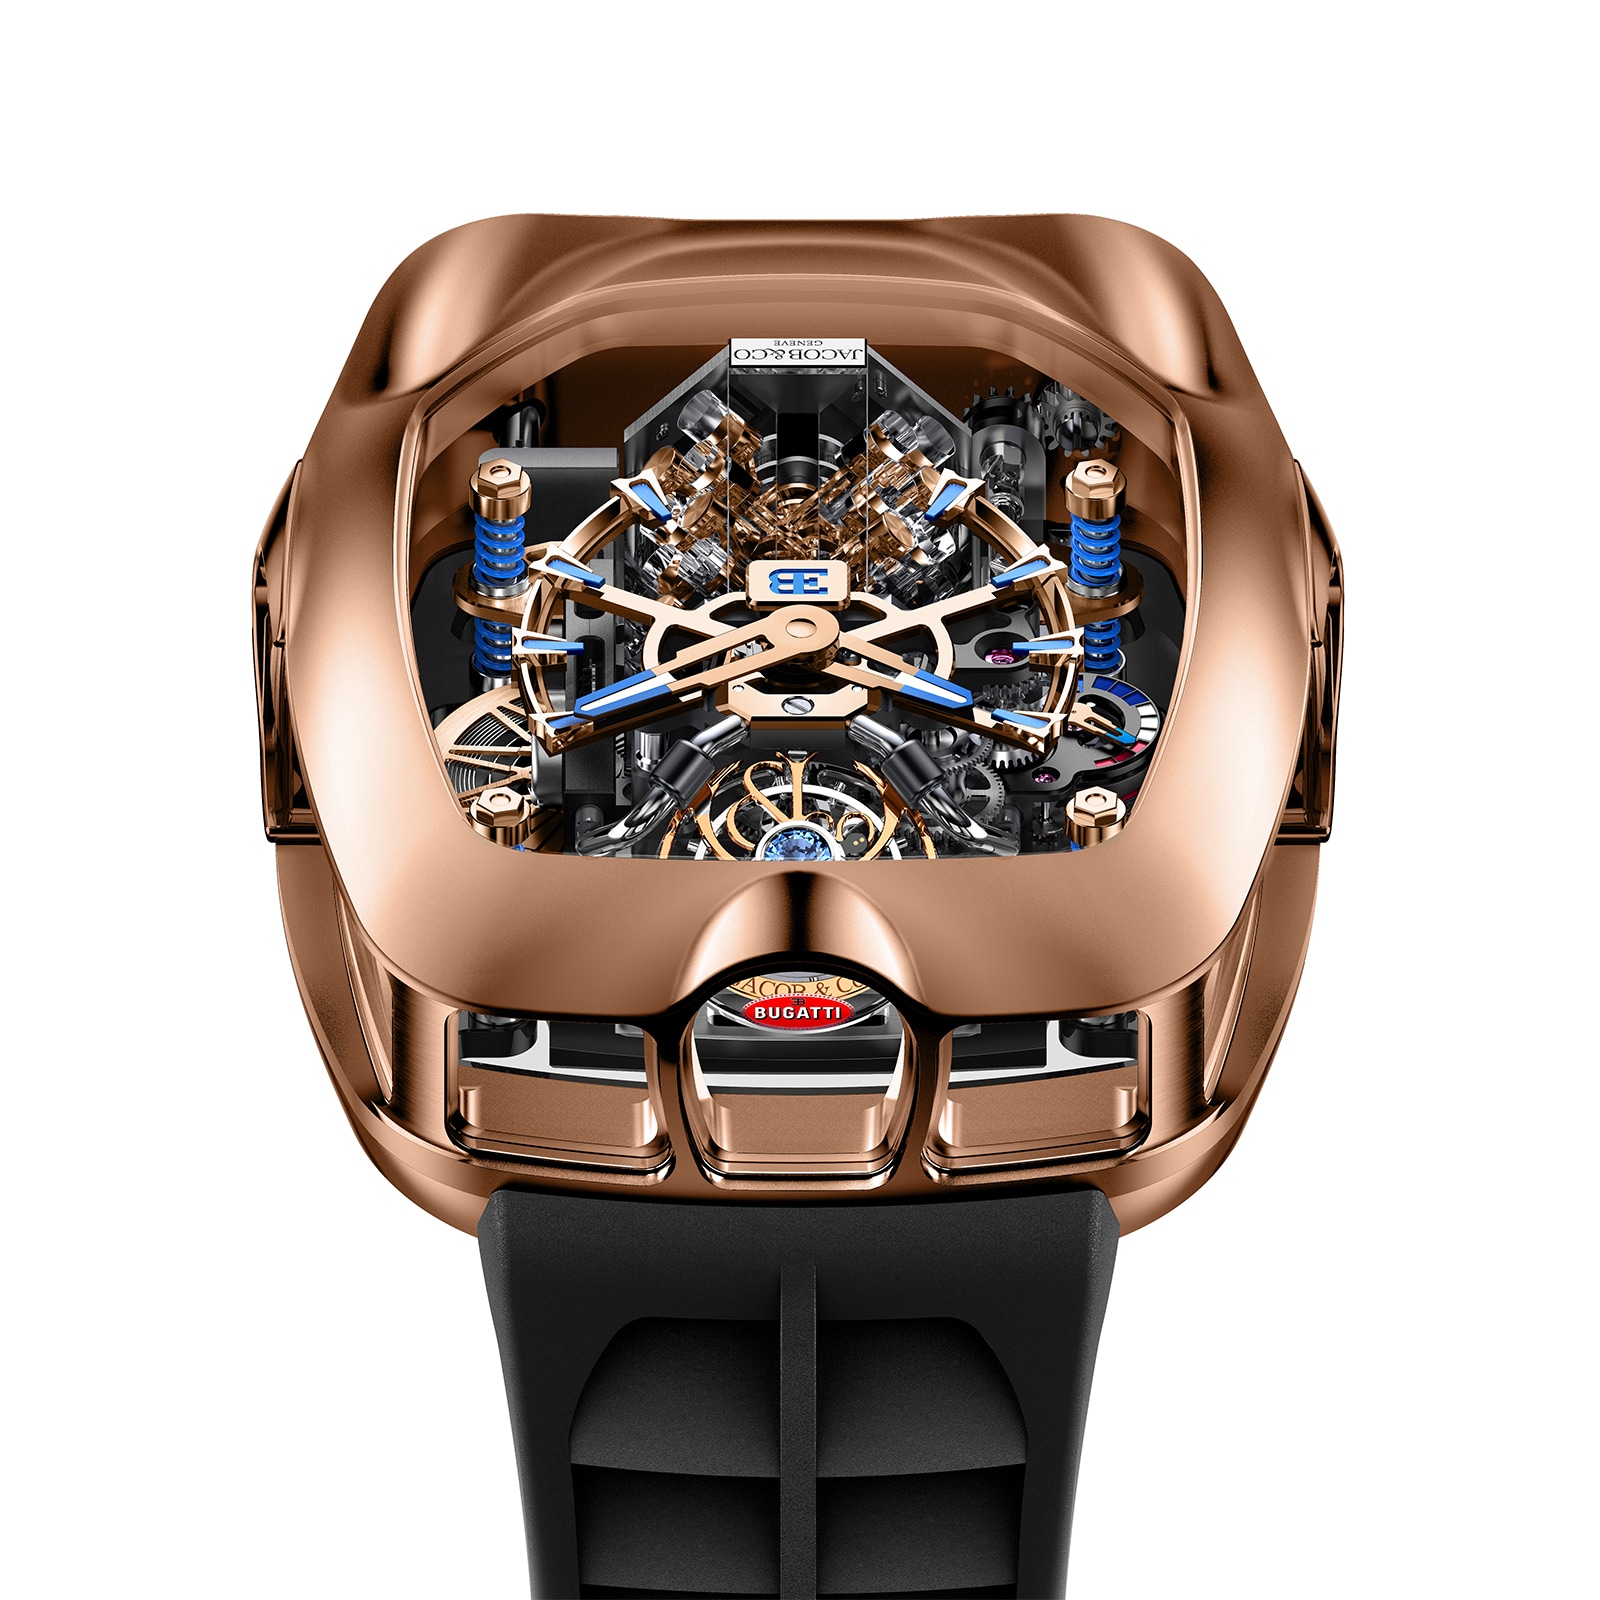 Jacob & Co Bugatti Chiron Tourbillon with a replica of the Chiron W16  engine – WatchFaces for Smart Watches